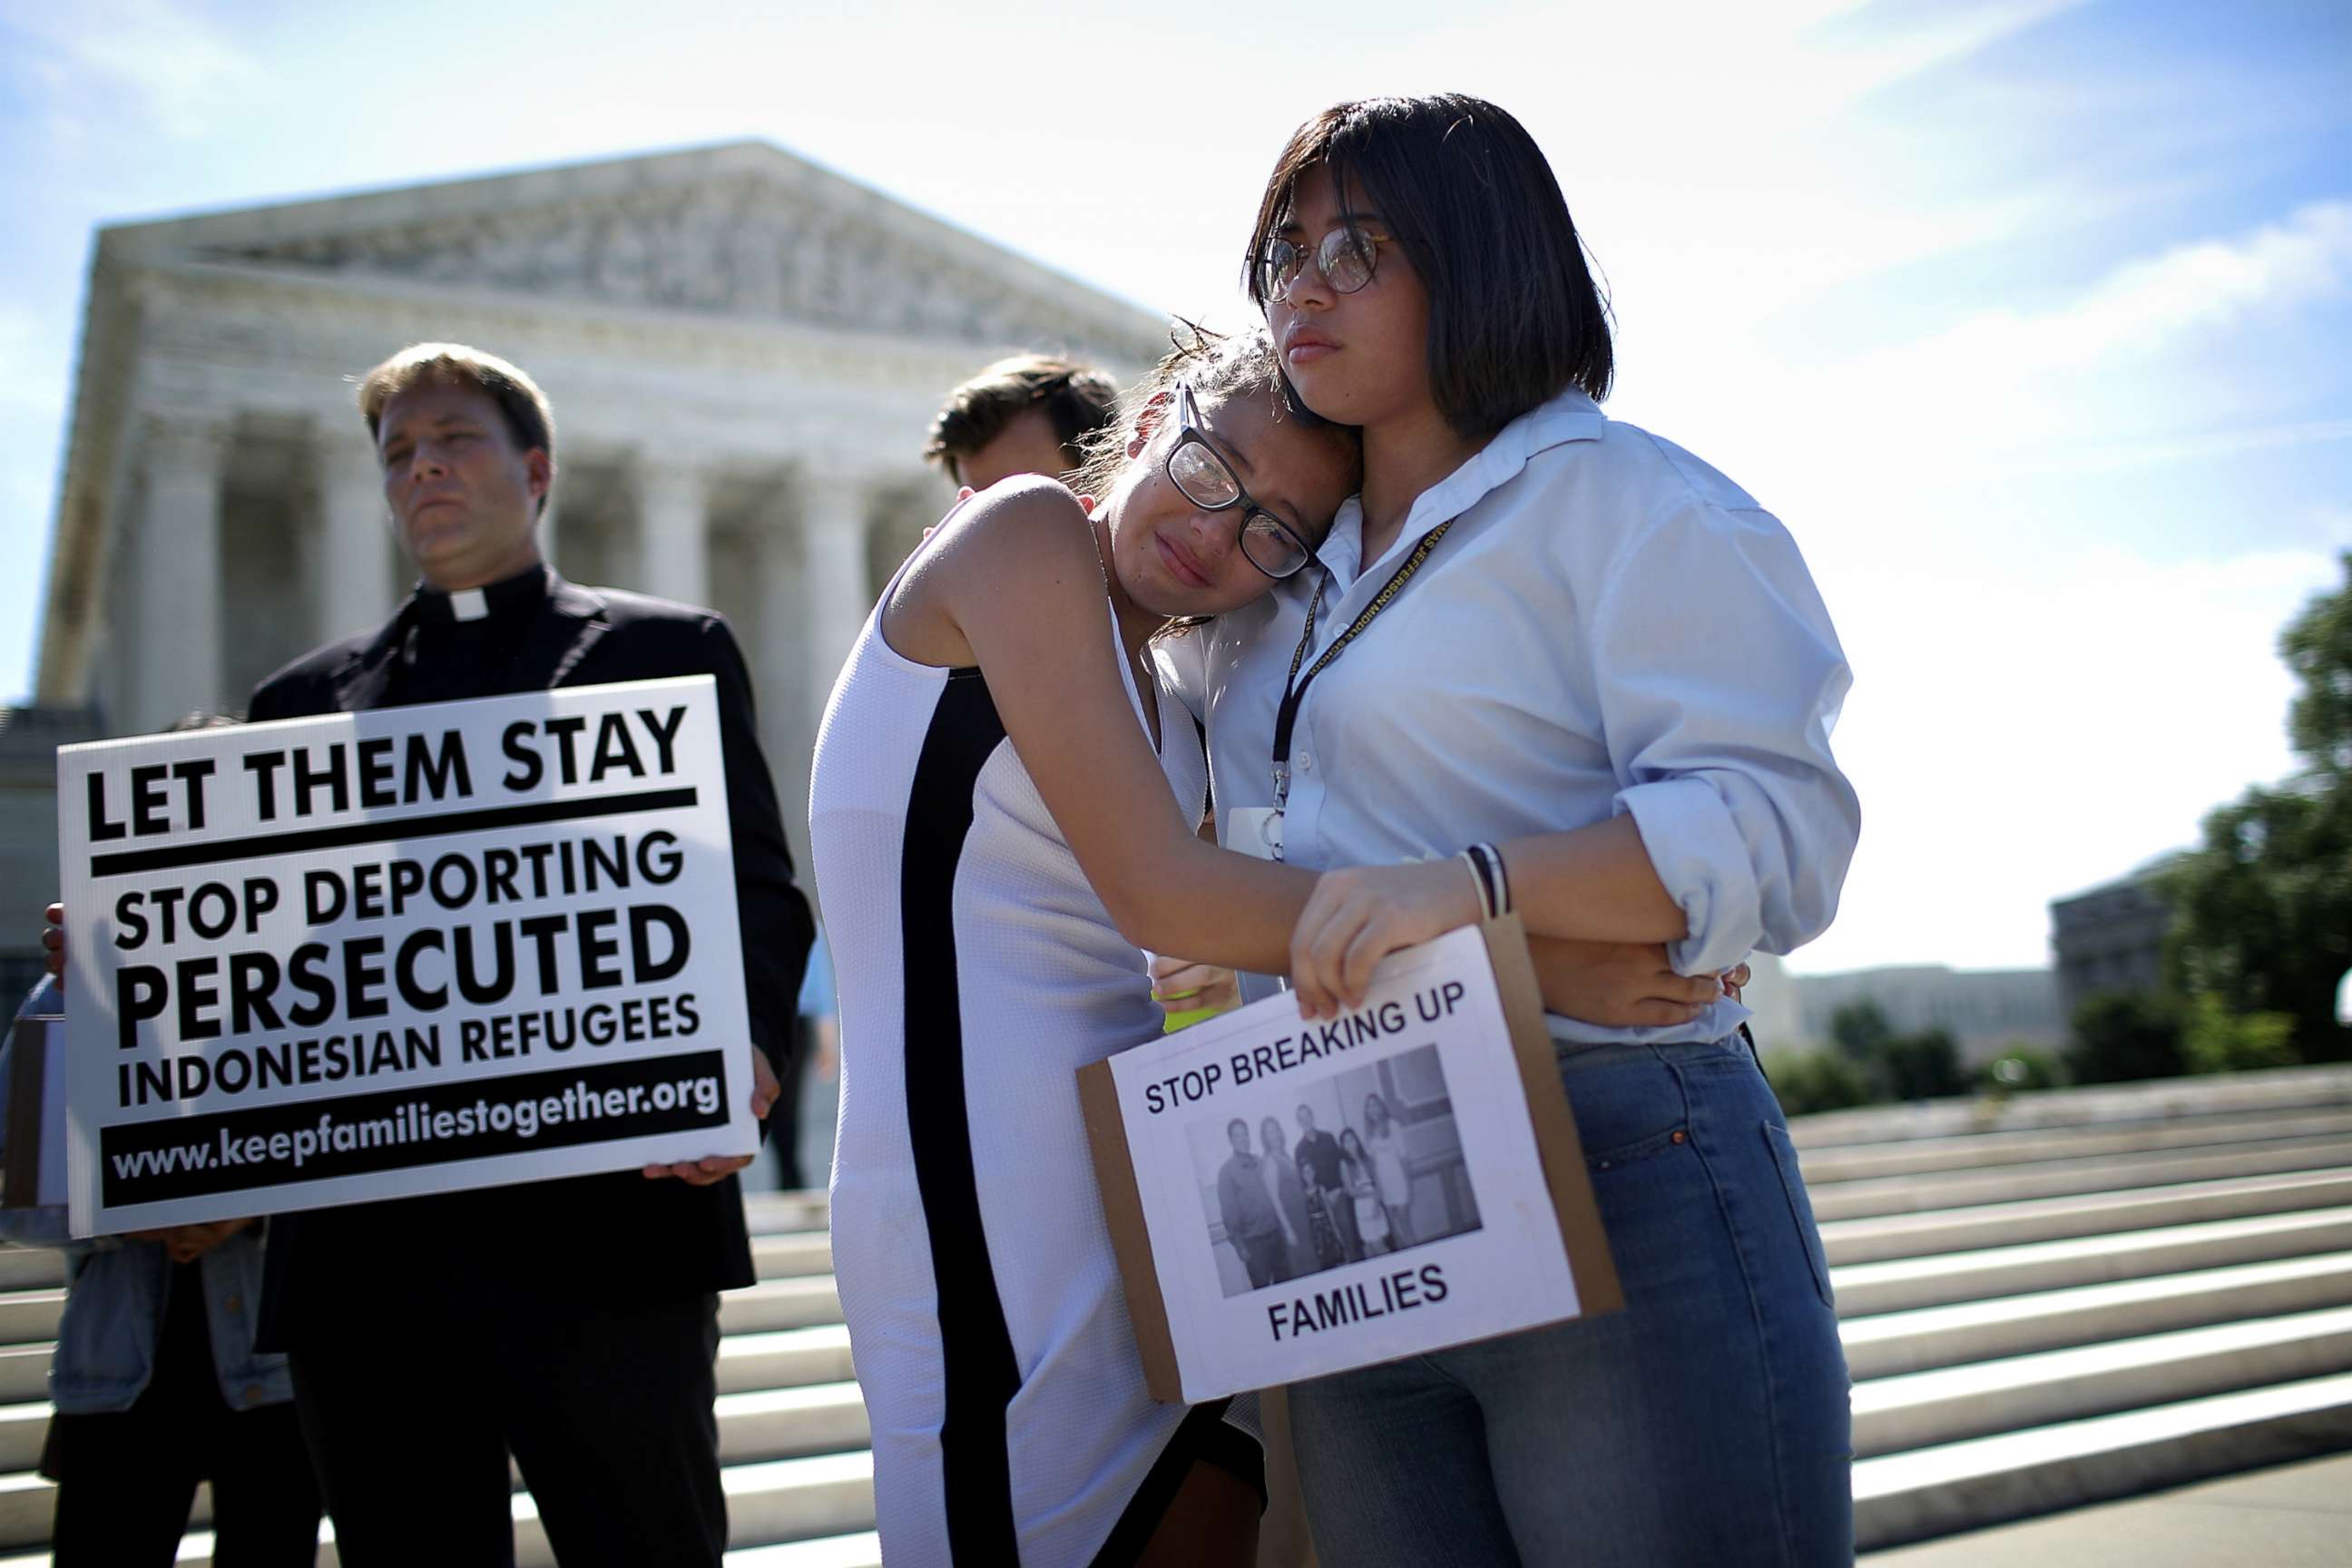 PHOTO: Sisters Michelle Edralin and Nicole Edralin, right, from Highland Park, console one another outside the U.S. Supreme Court as the court issued an immigration ruling June 26, 2018 in Washington, D.C., upholding President Trump's travel ban.